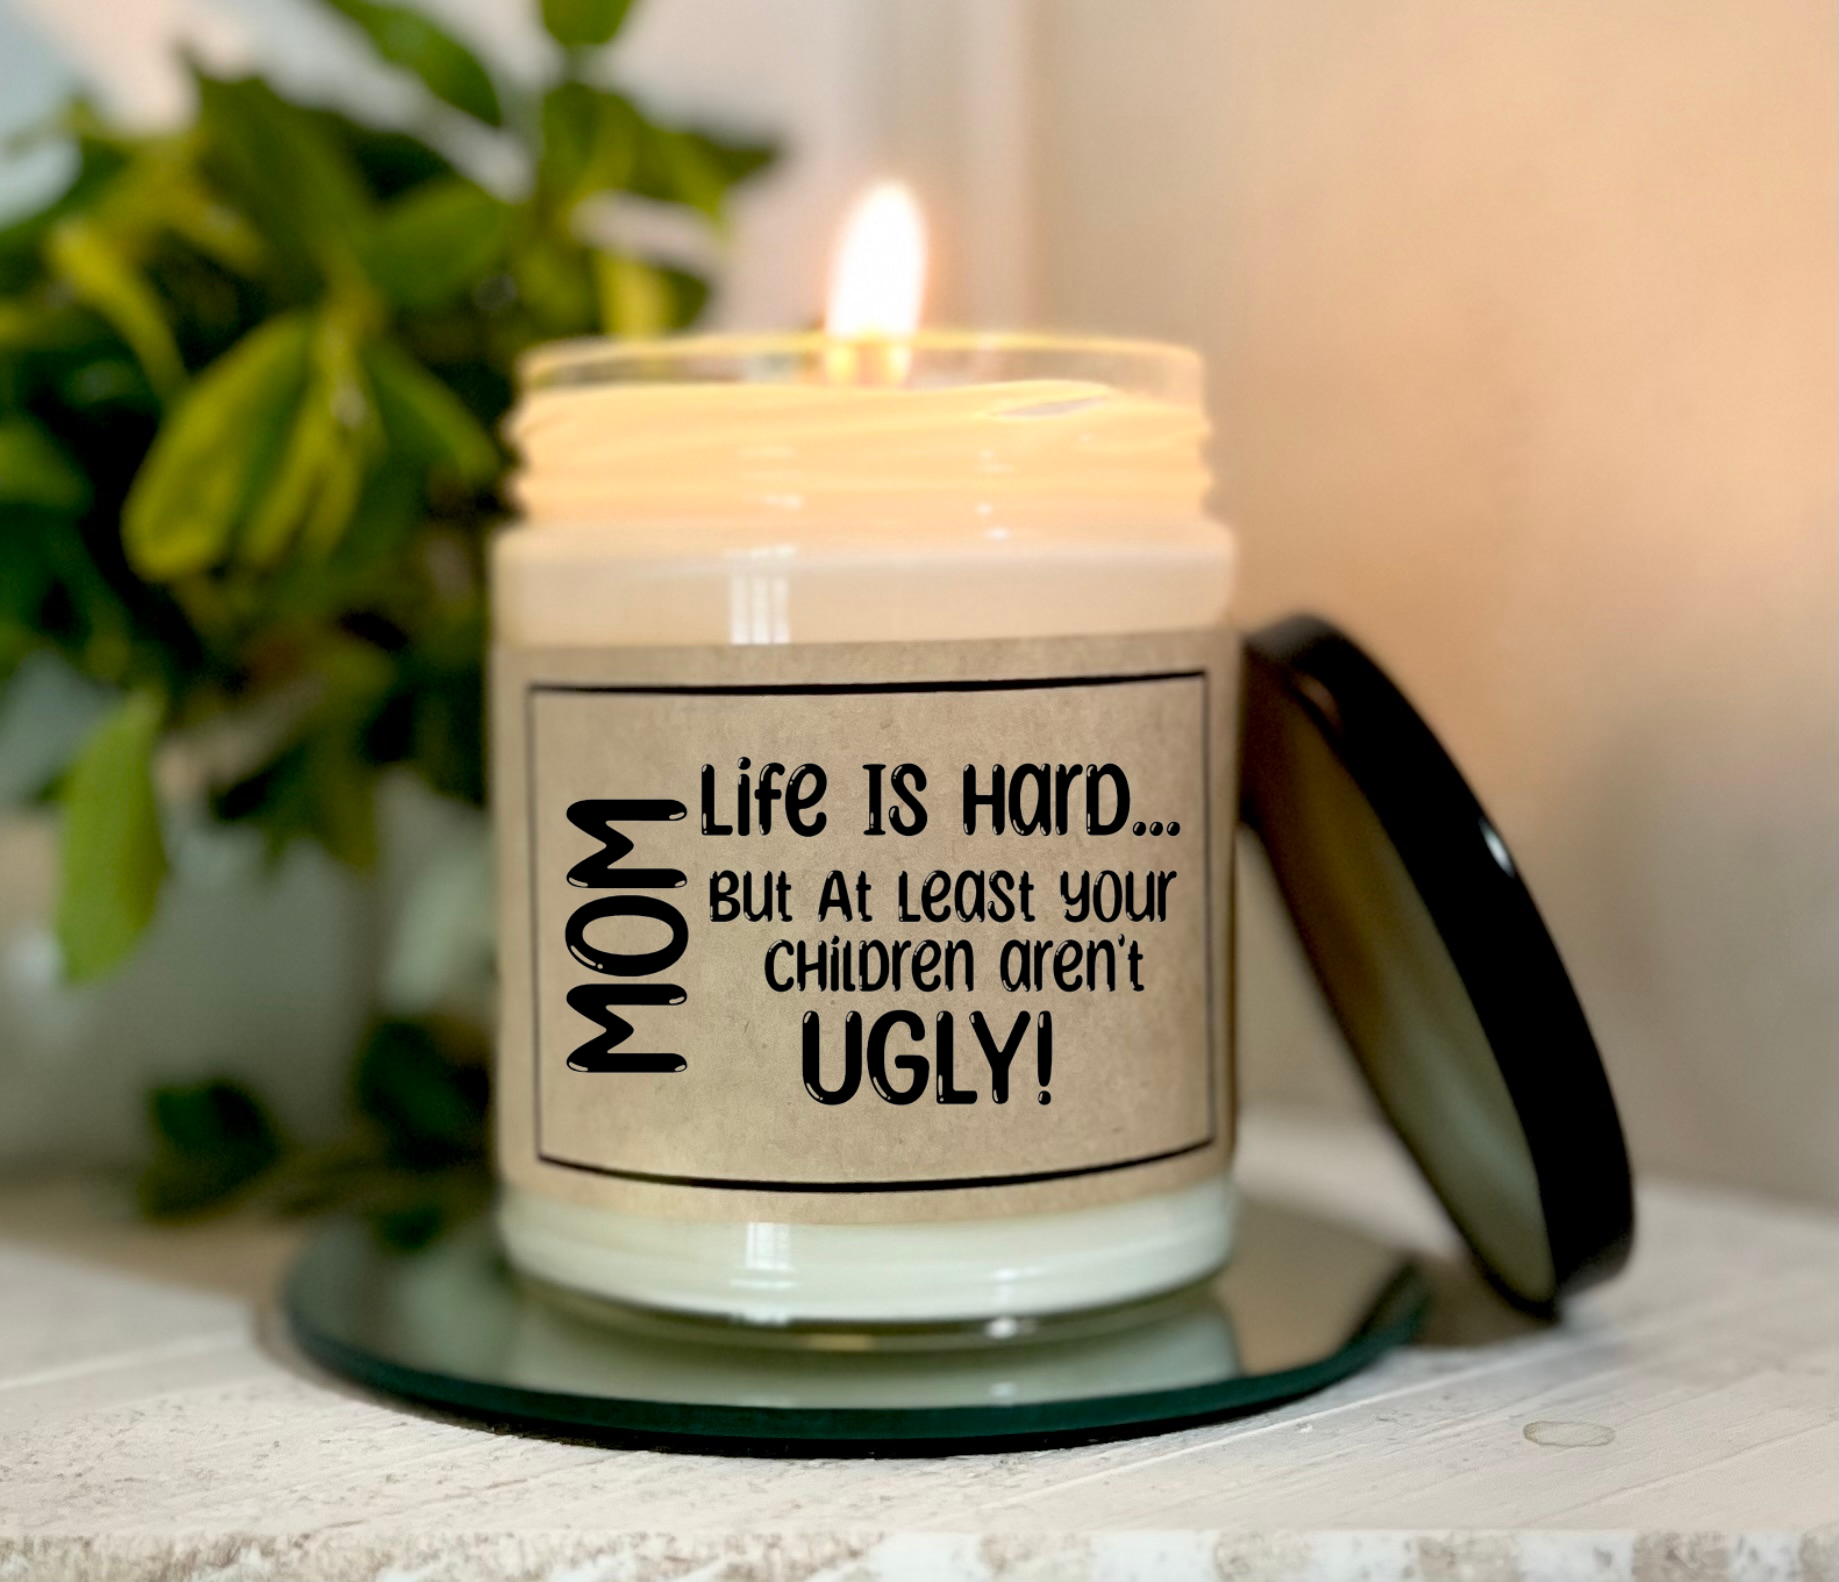 Mom Life Is Hard At Least Your Children Aren't Ugly - Custom Candle – KKH  Candles